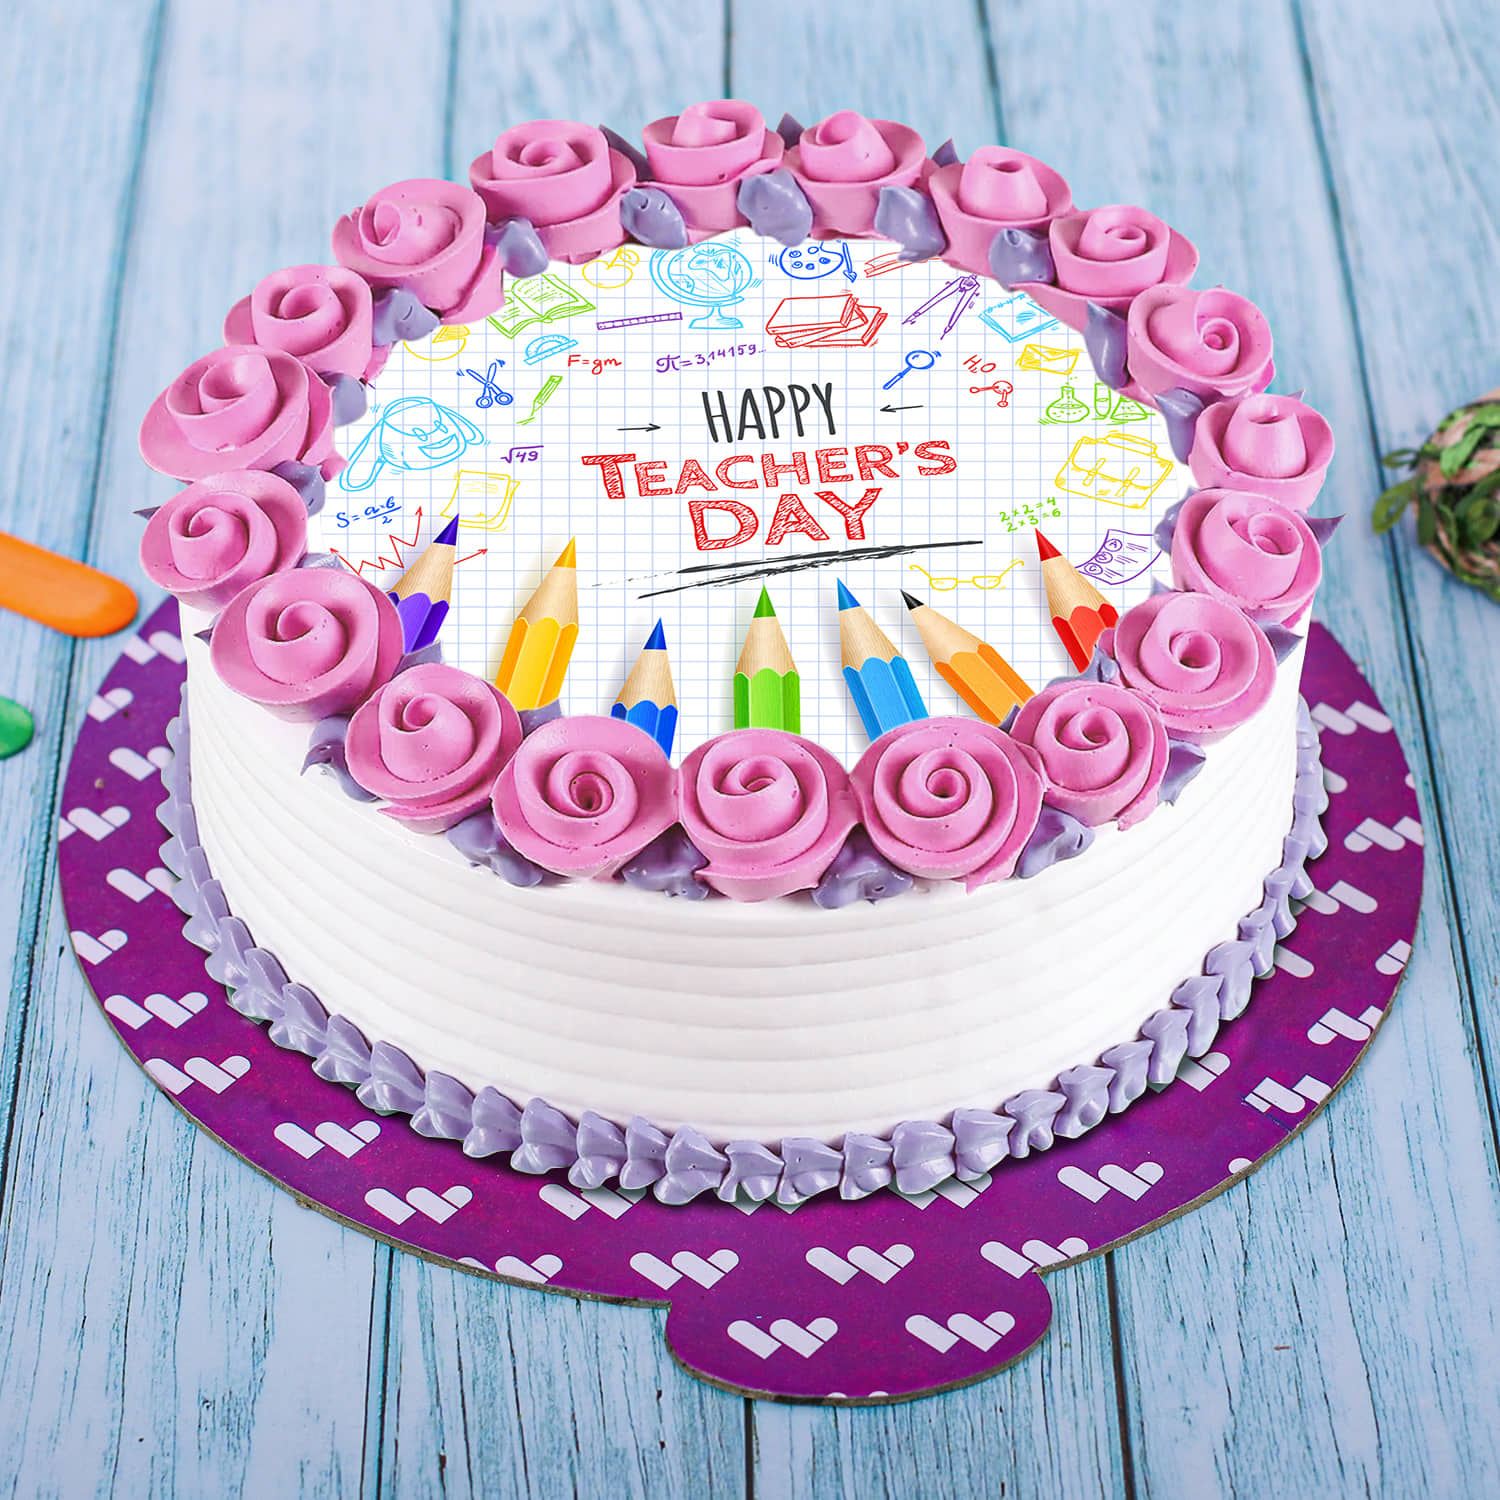 Express your Gratitude with a Special Teacher's Day Cake | Gurgaon Bakers